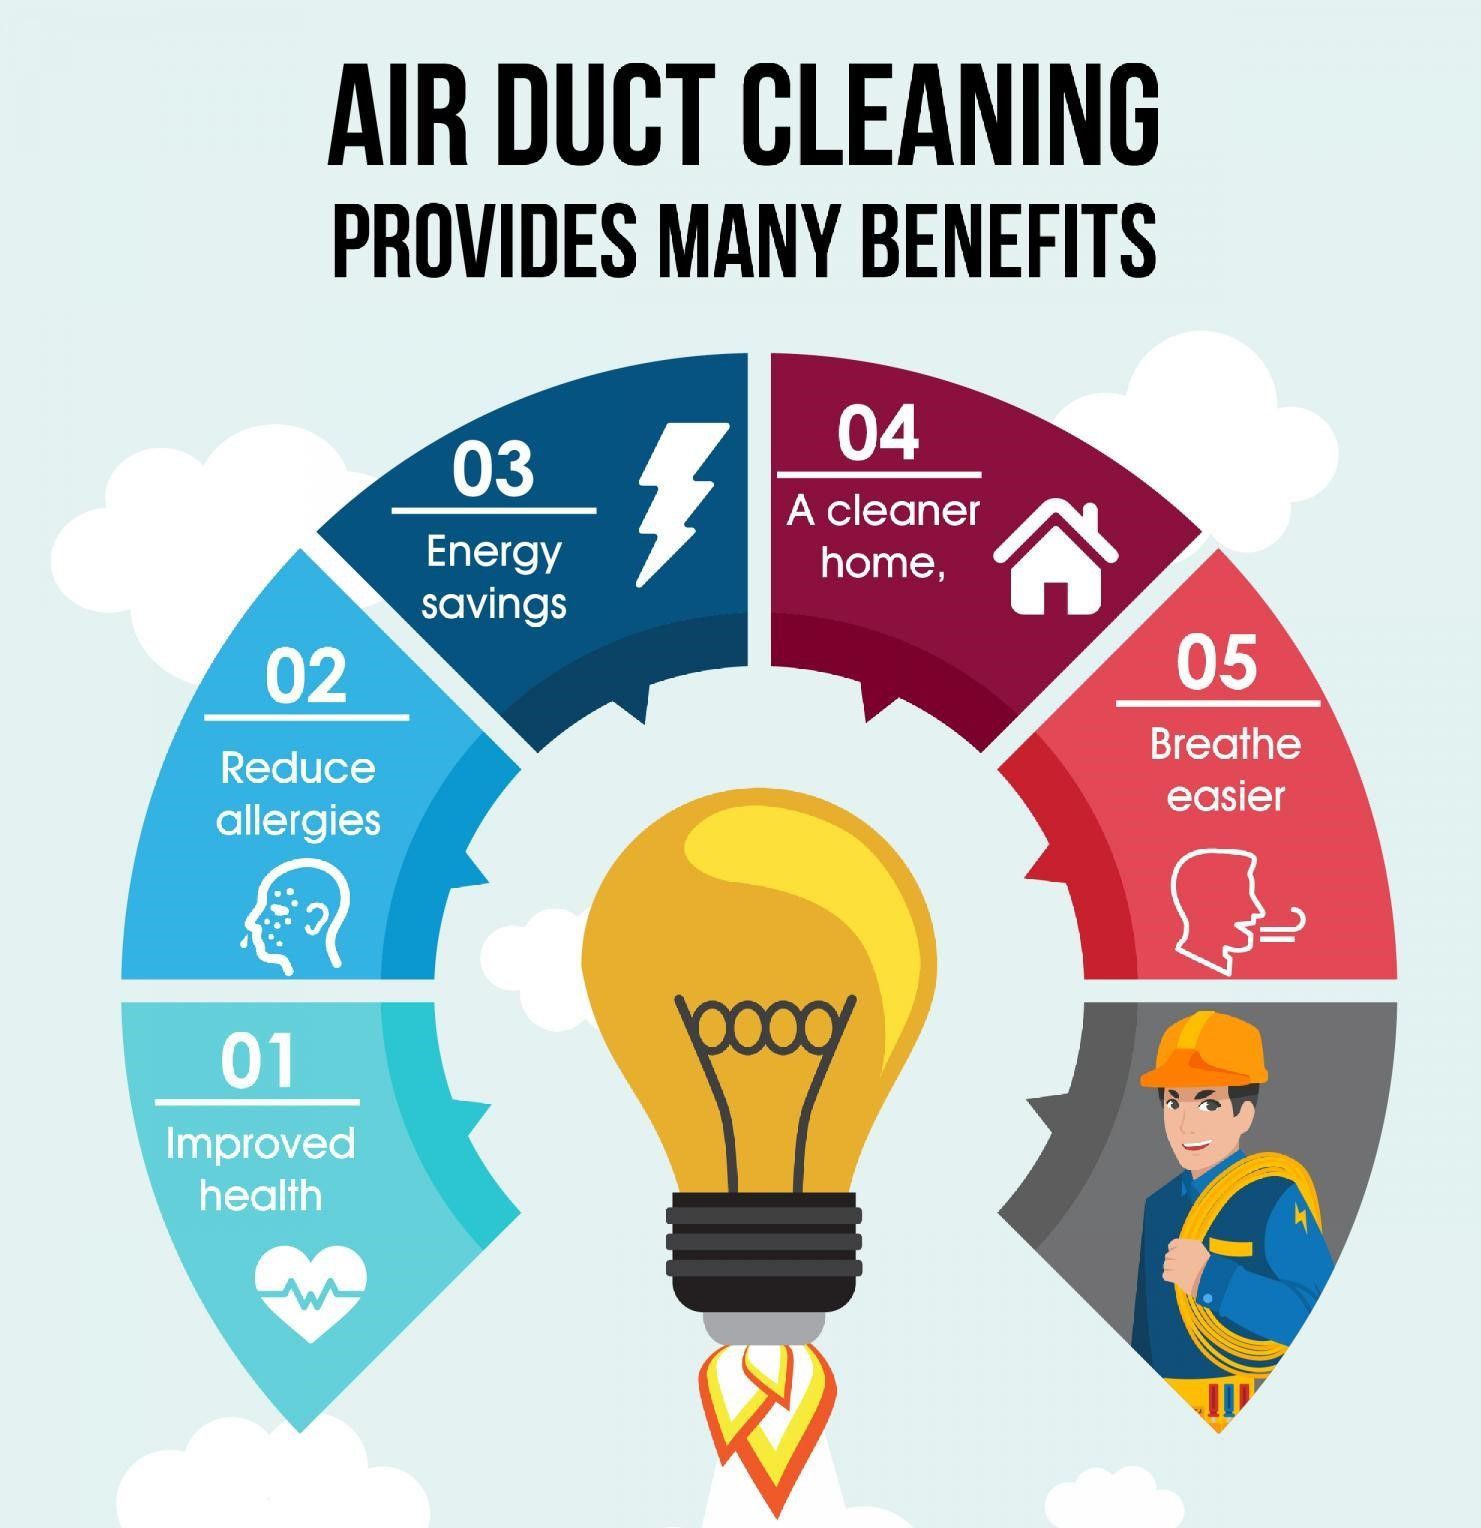 Benefits of Duct Cleaning